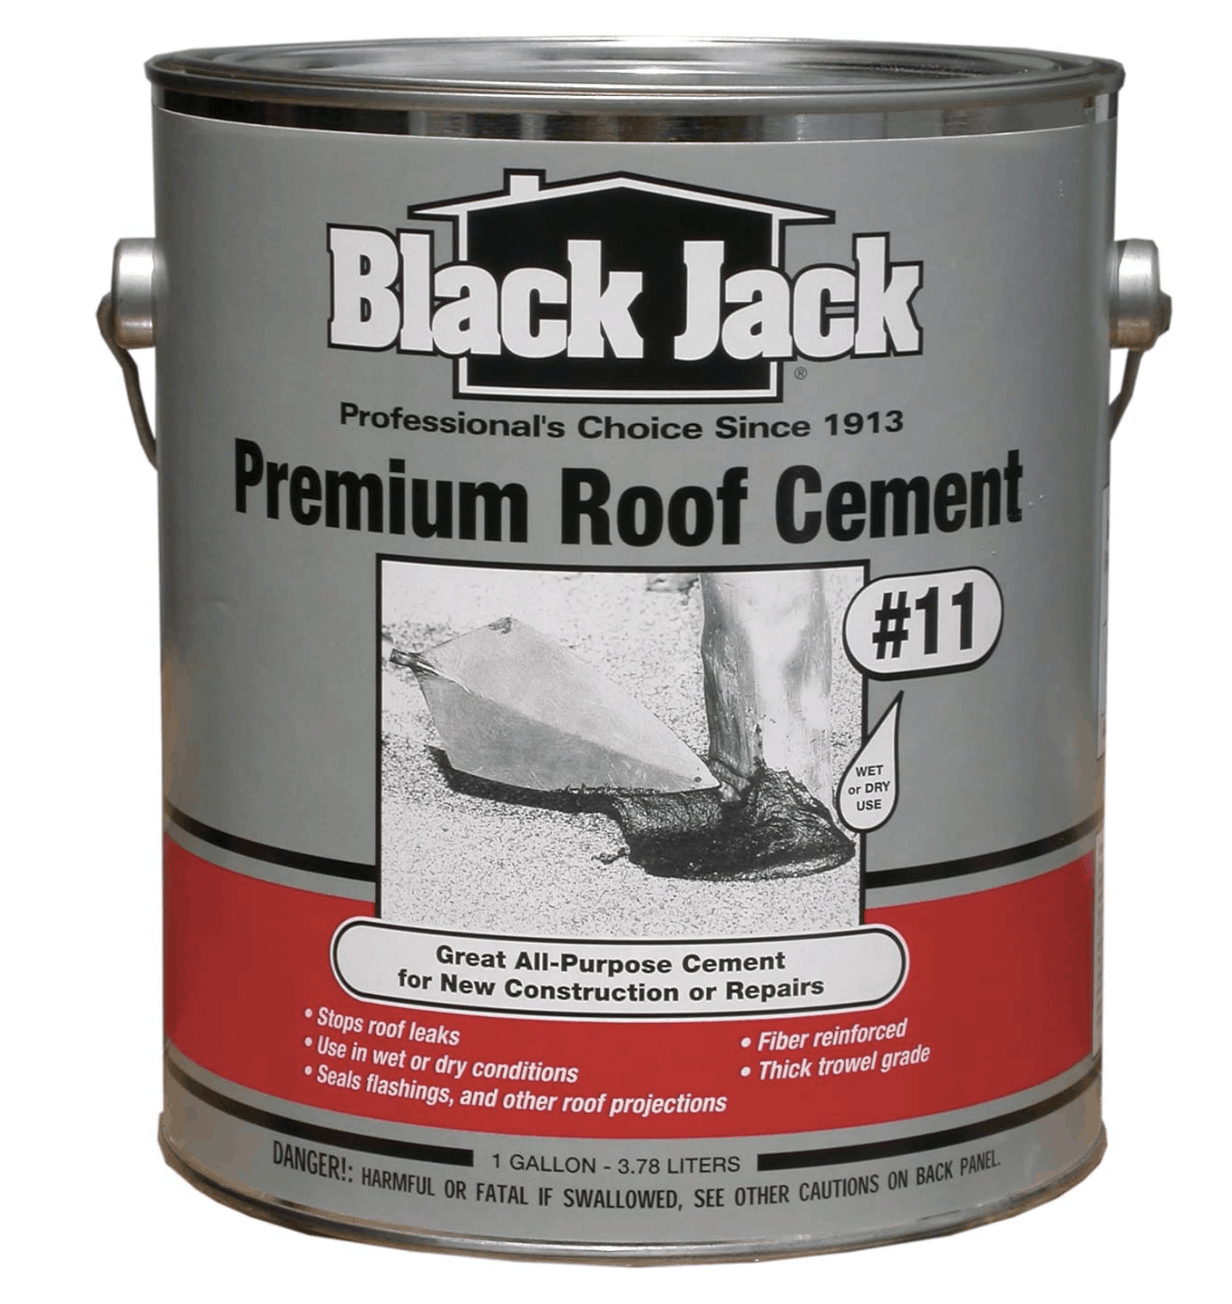 What is Roofing Cement and How do I Use Roofing Cement?